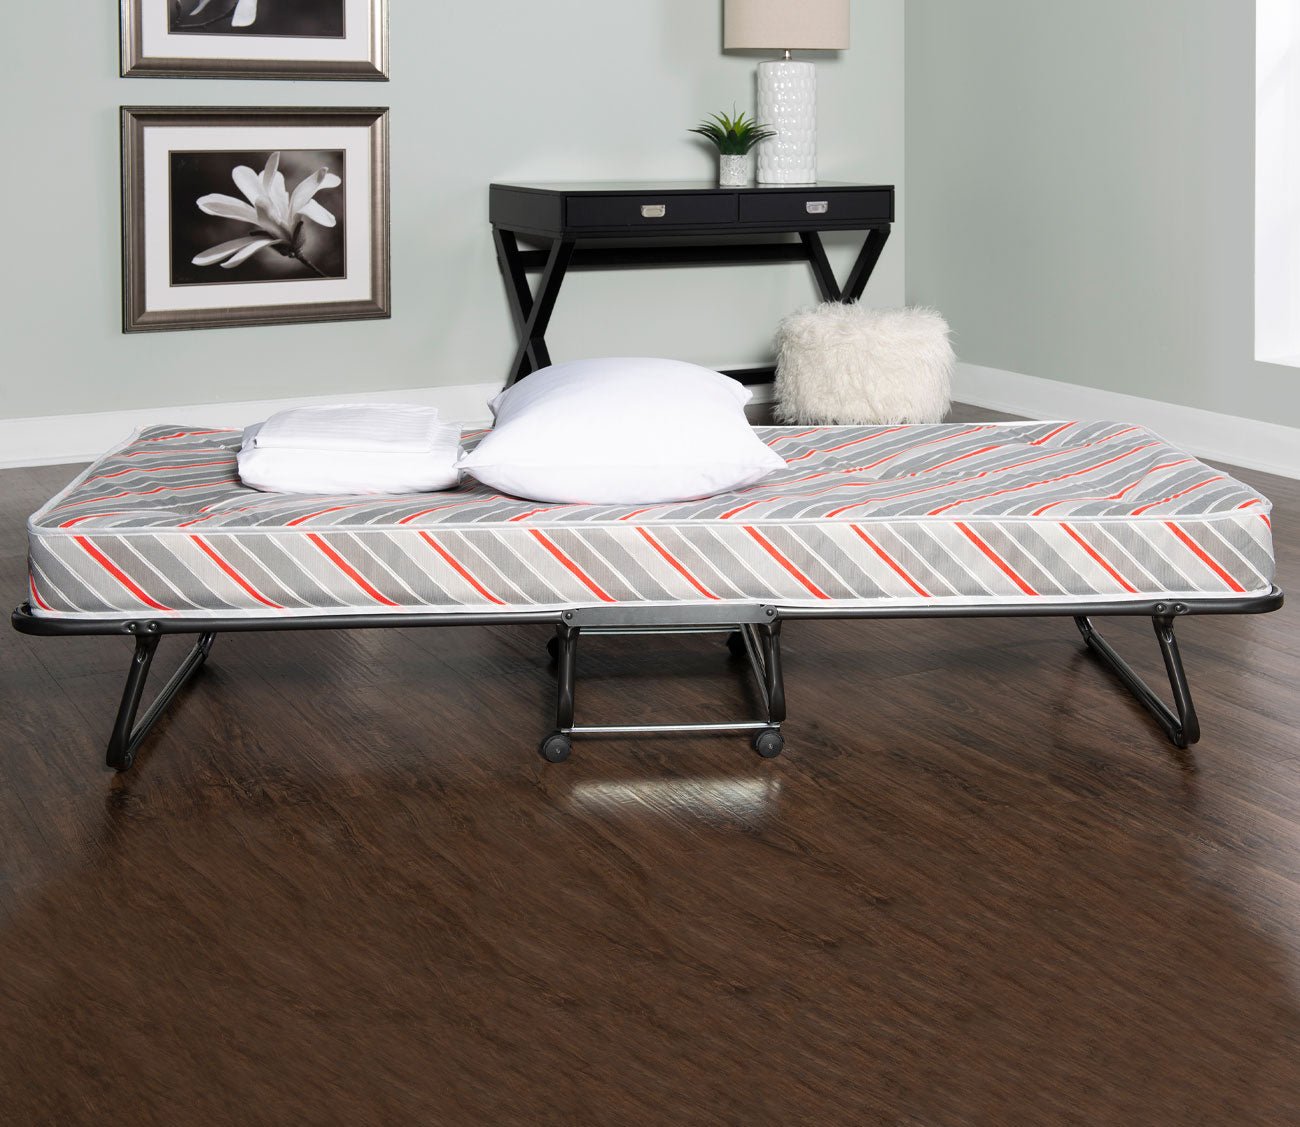 Torino Folding Bed with Mattress by Linon